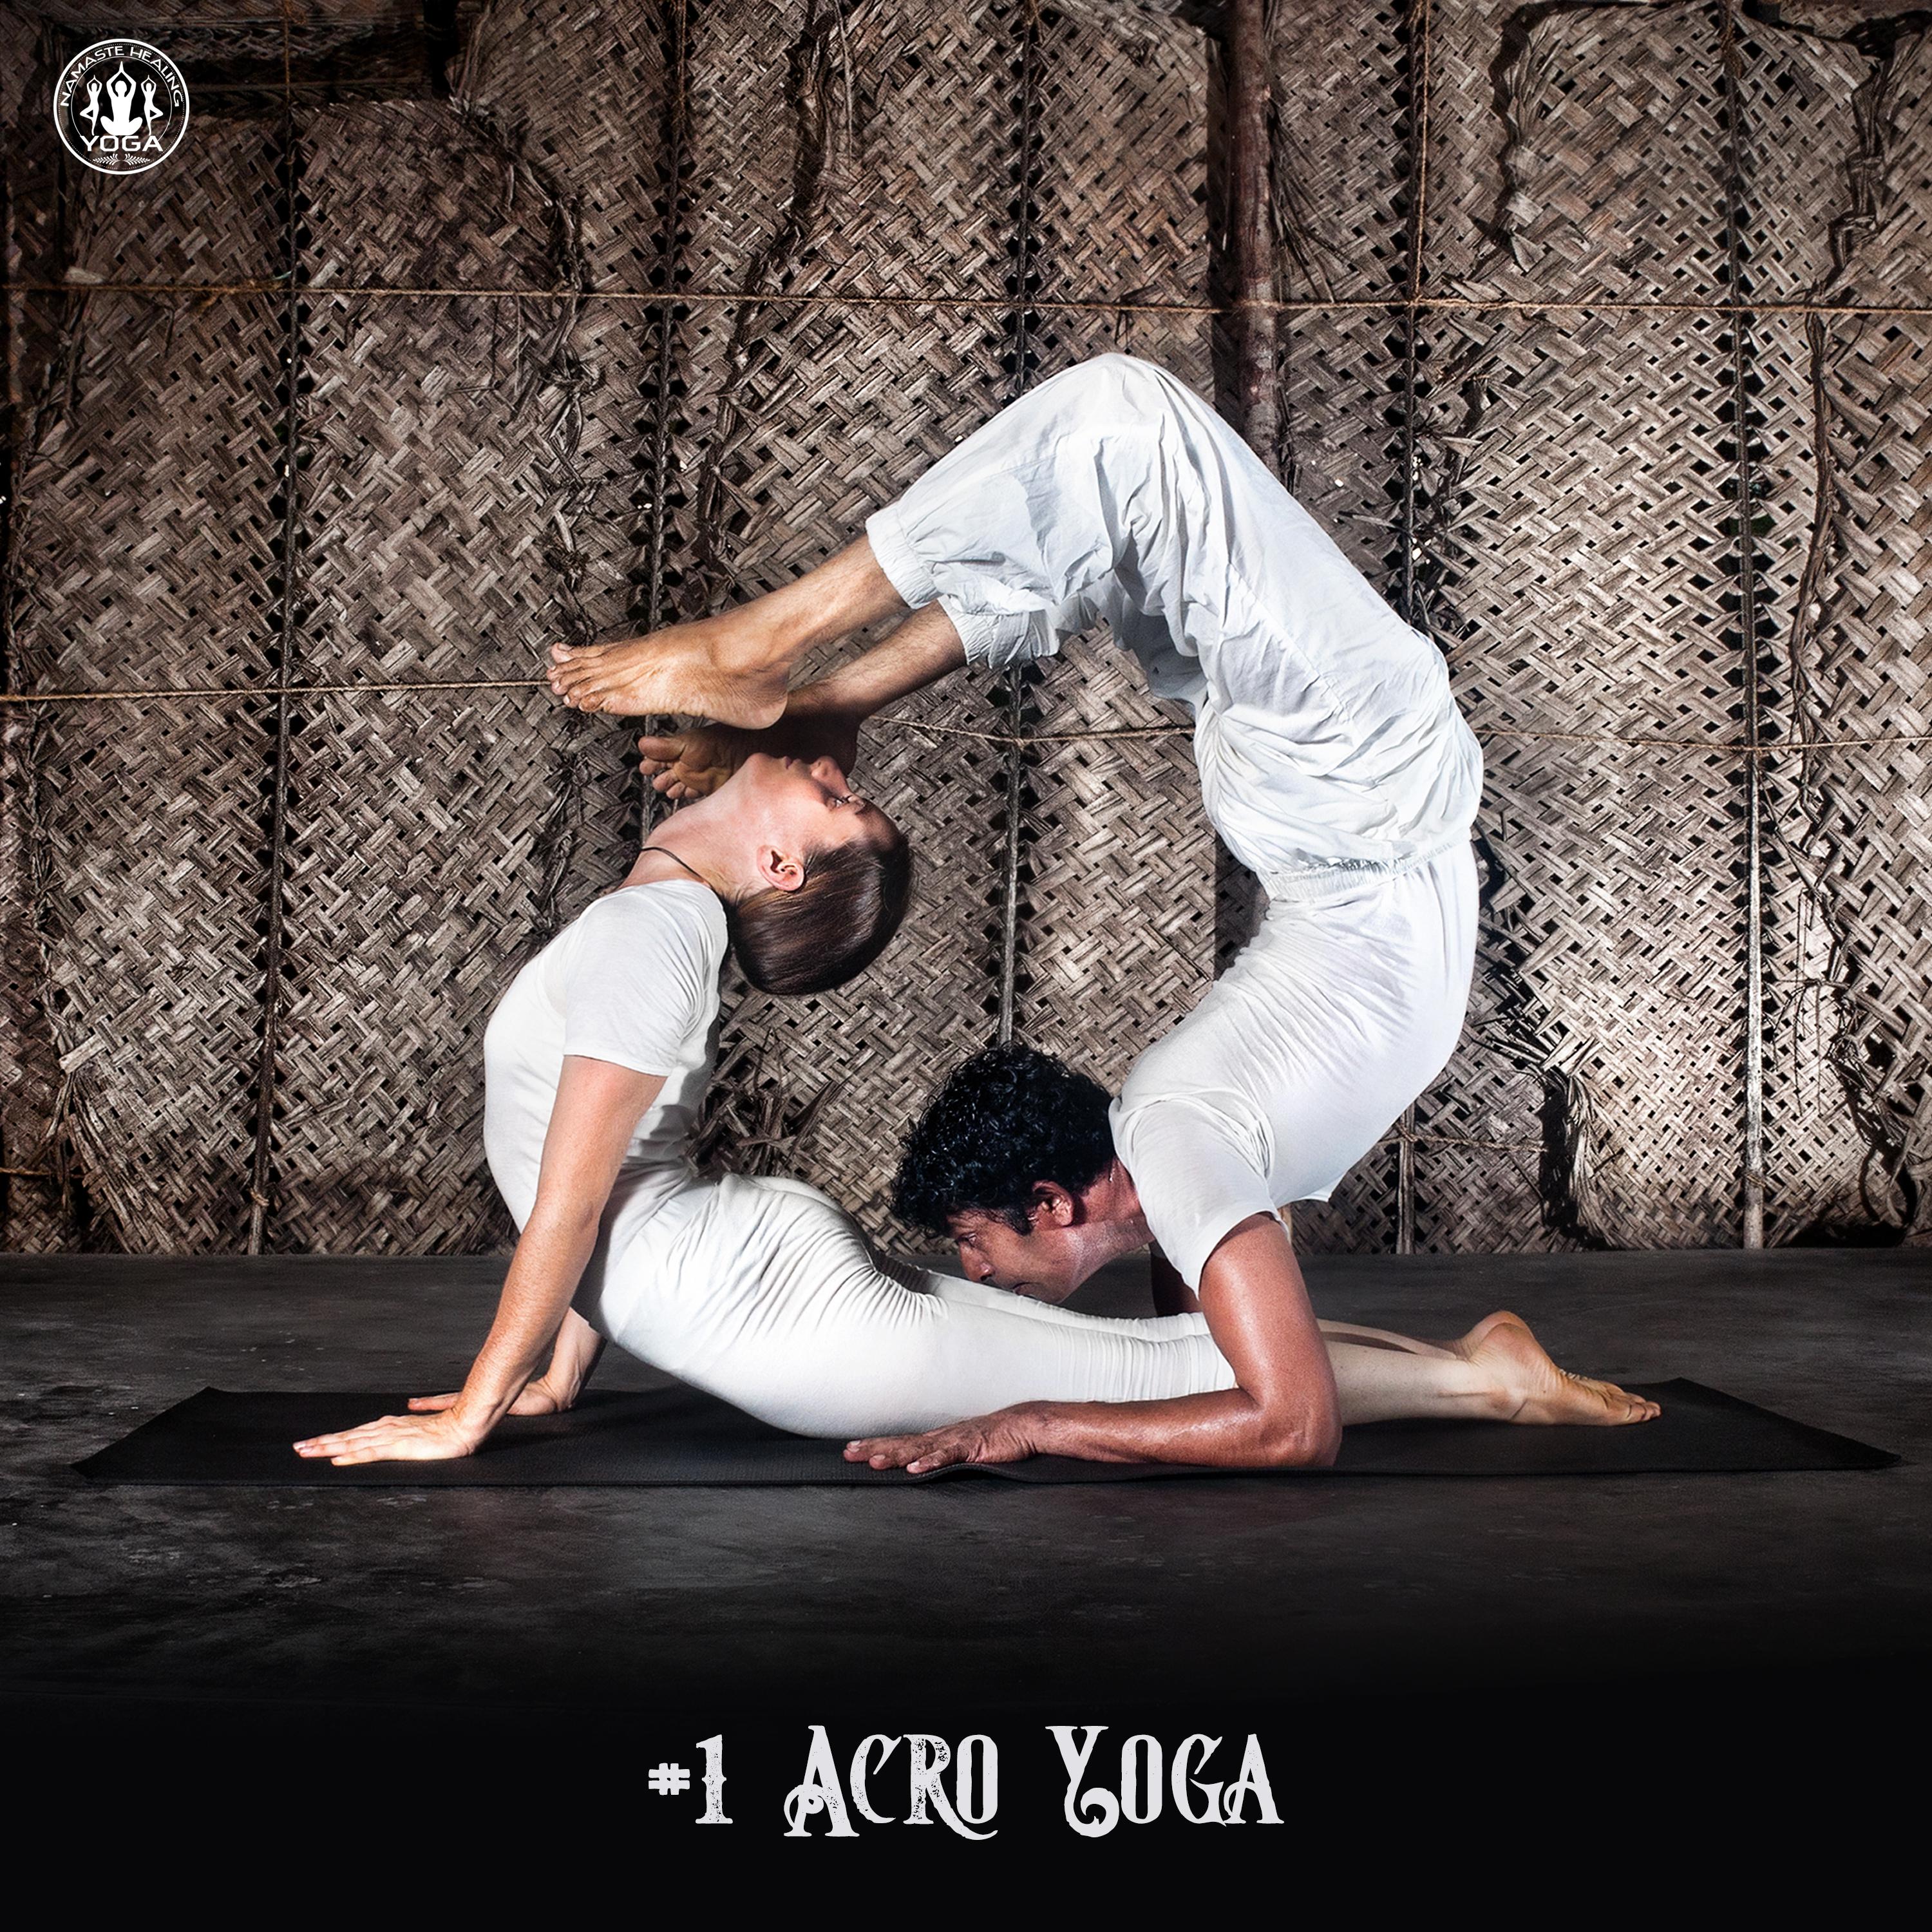 # 1 Acro Yoga (Exercises for Couples, Joy, Trust, Concentration)